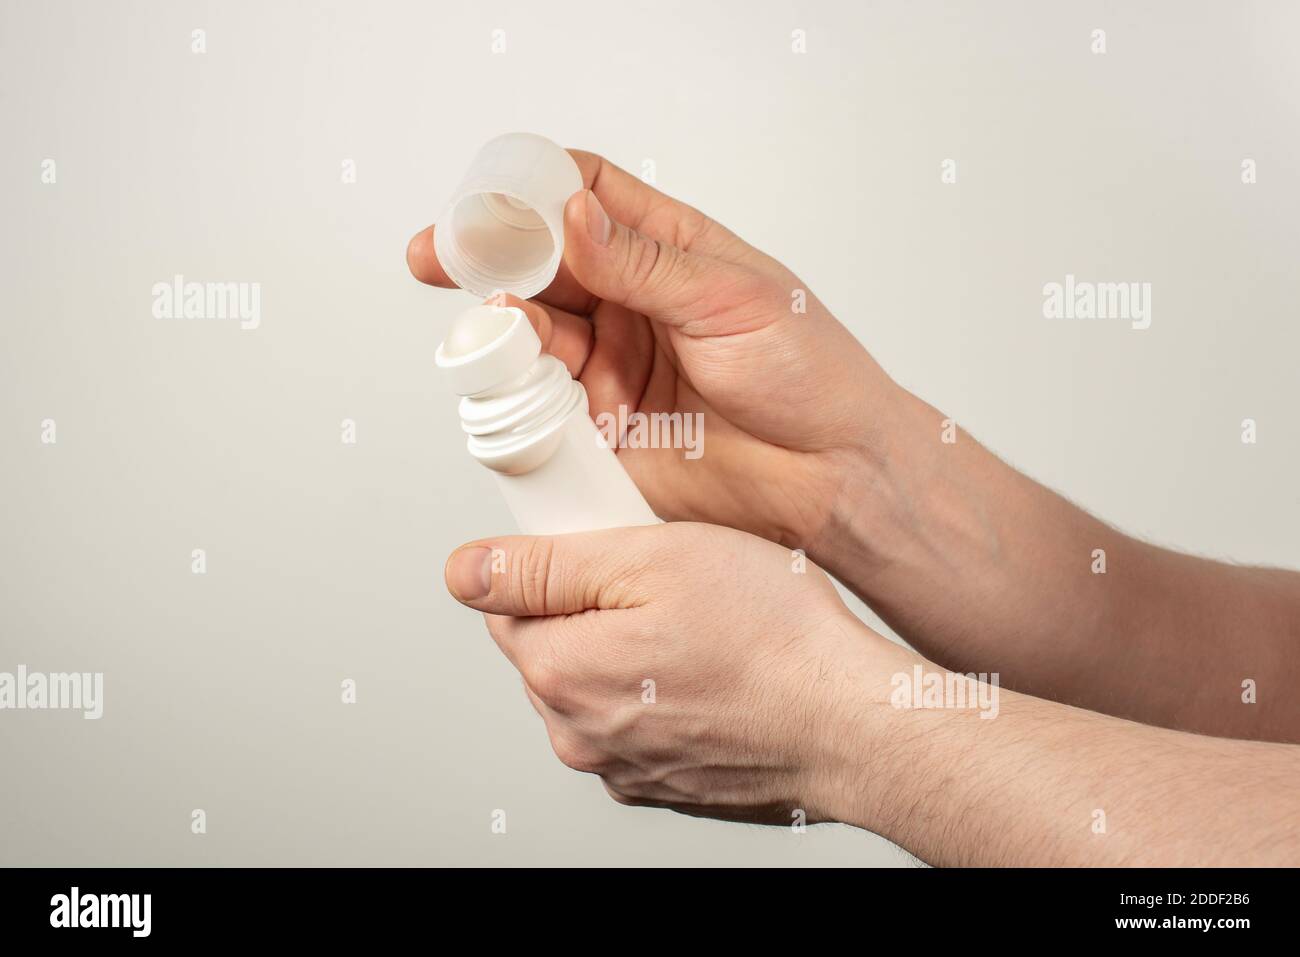 Male hands holding roll-on deodorant for armpits on a white background  Stock Photo - Alamy